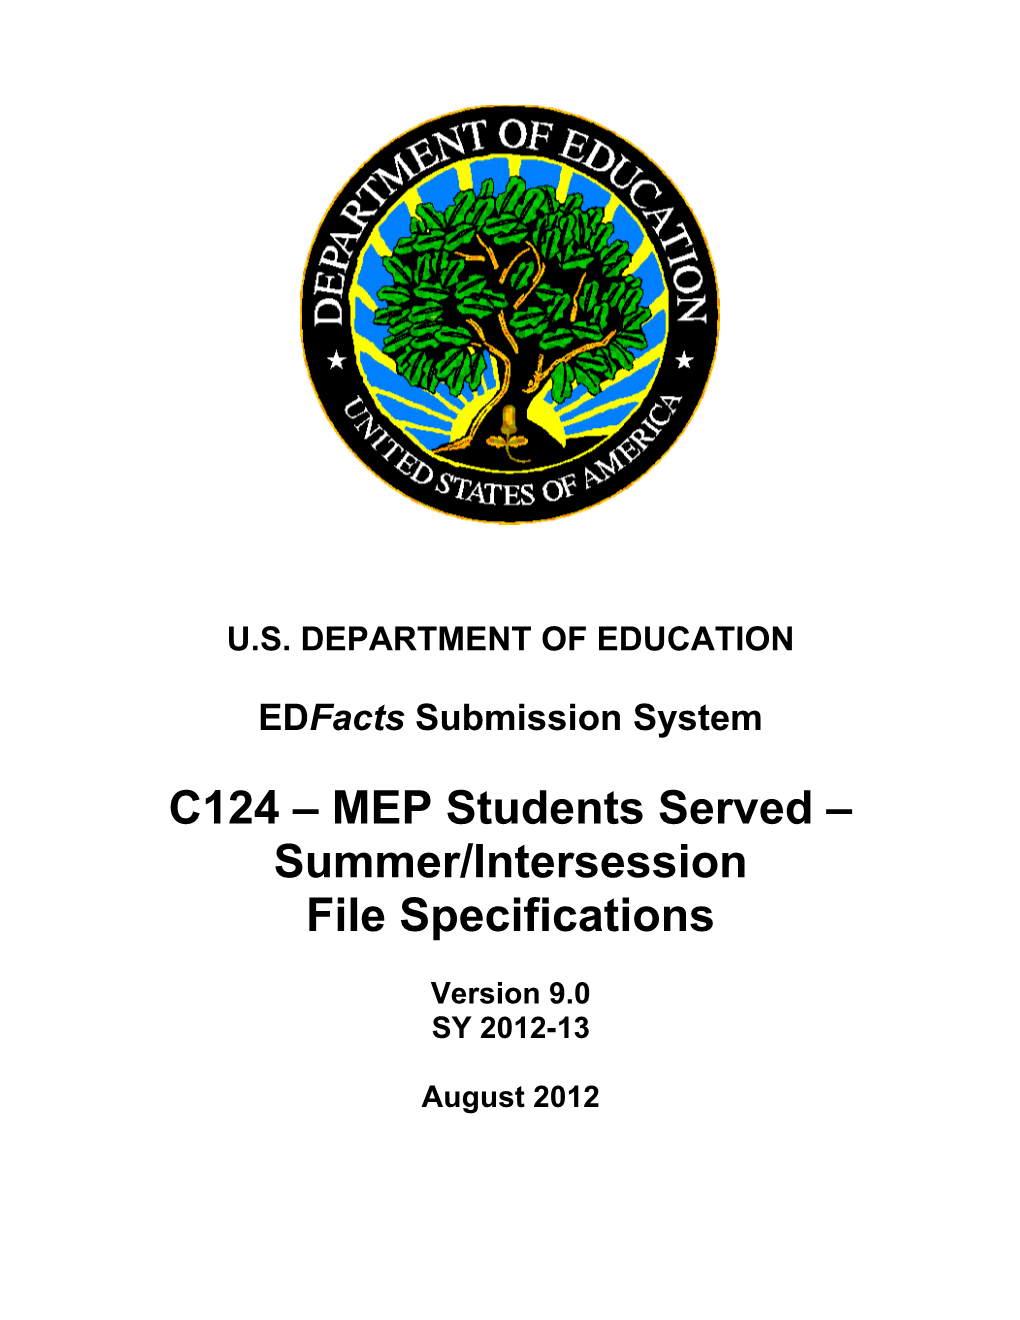 MEP Students Served Summer/Intersession File Specifications